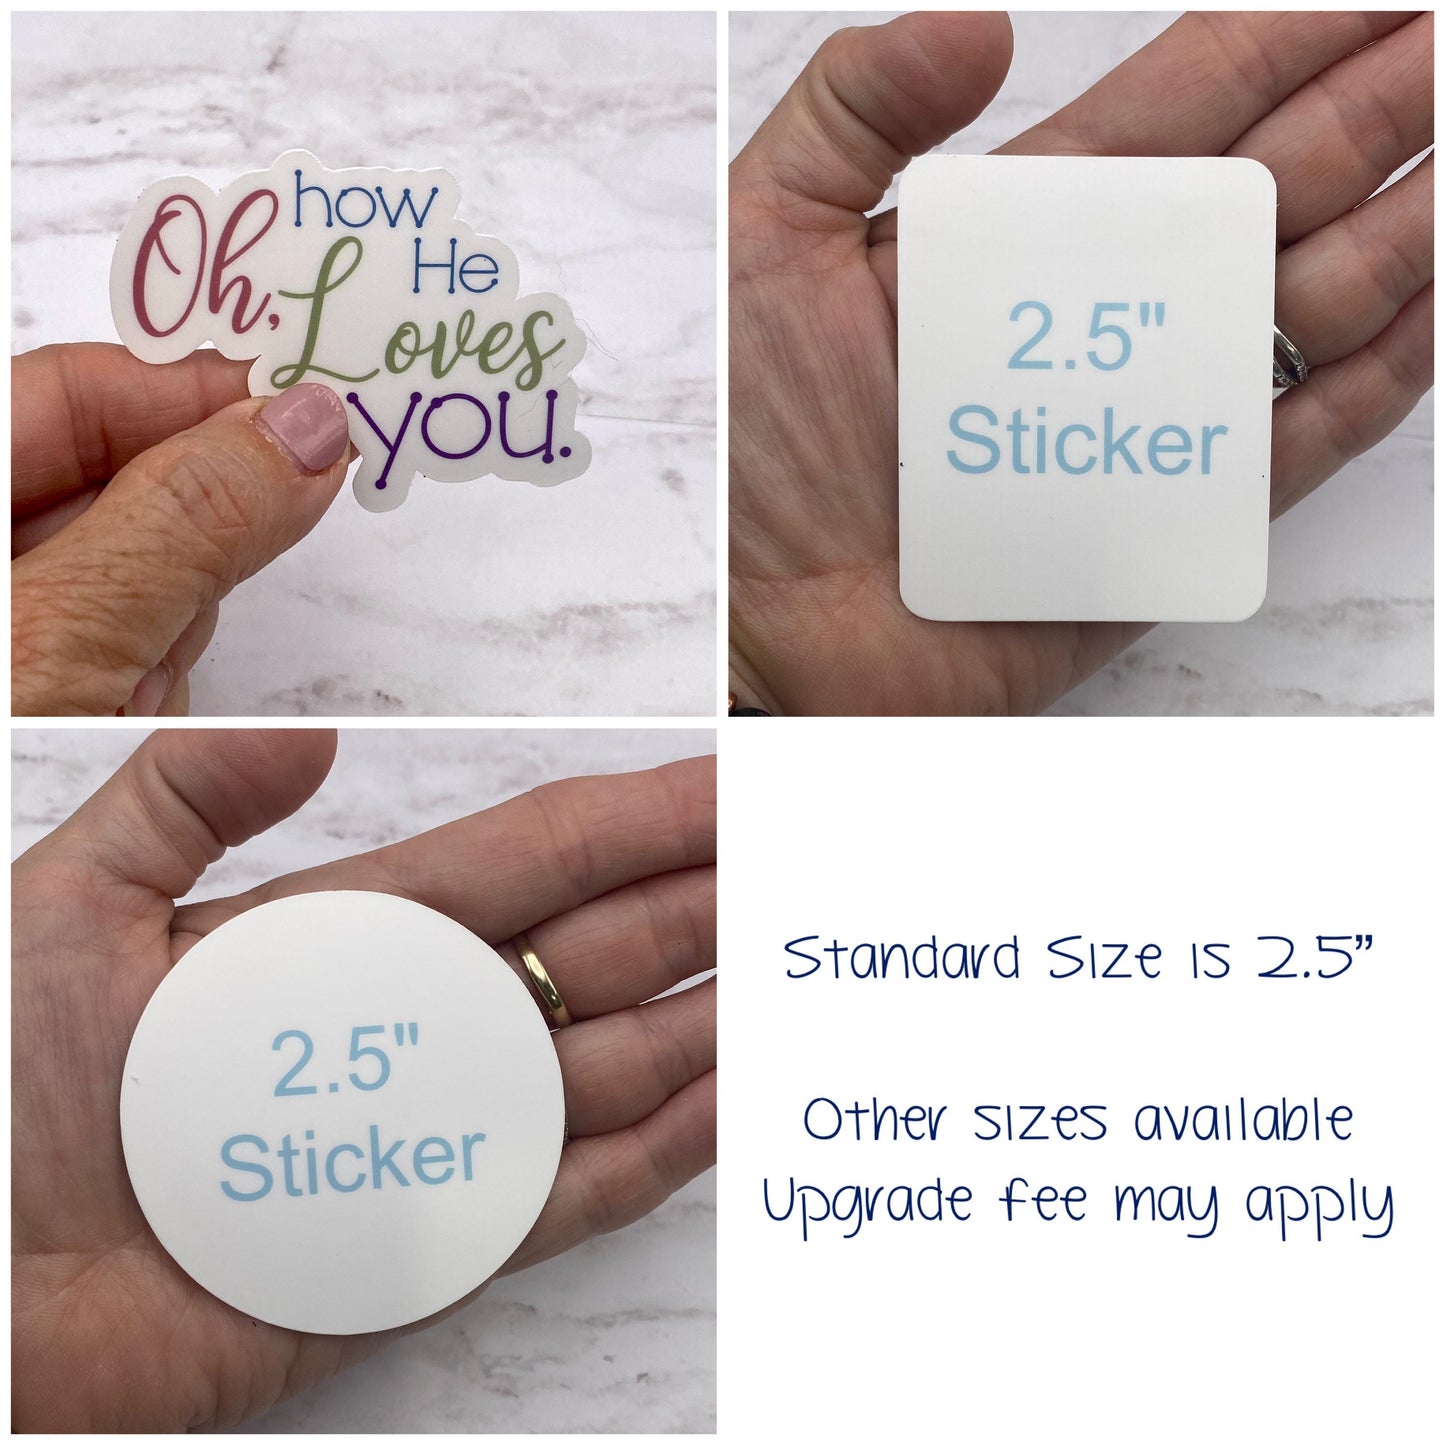 So Yeah   Waterproof Vinyl Sticker, Laptop or Water bottle decal, Gift for Sticker Collector,